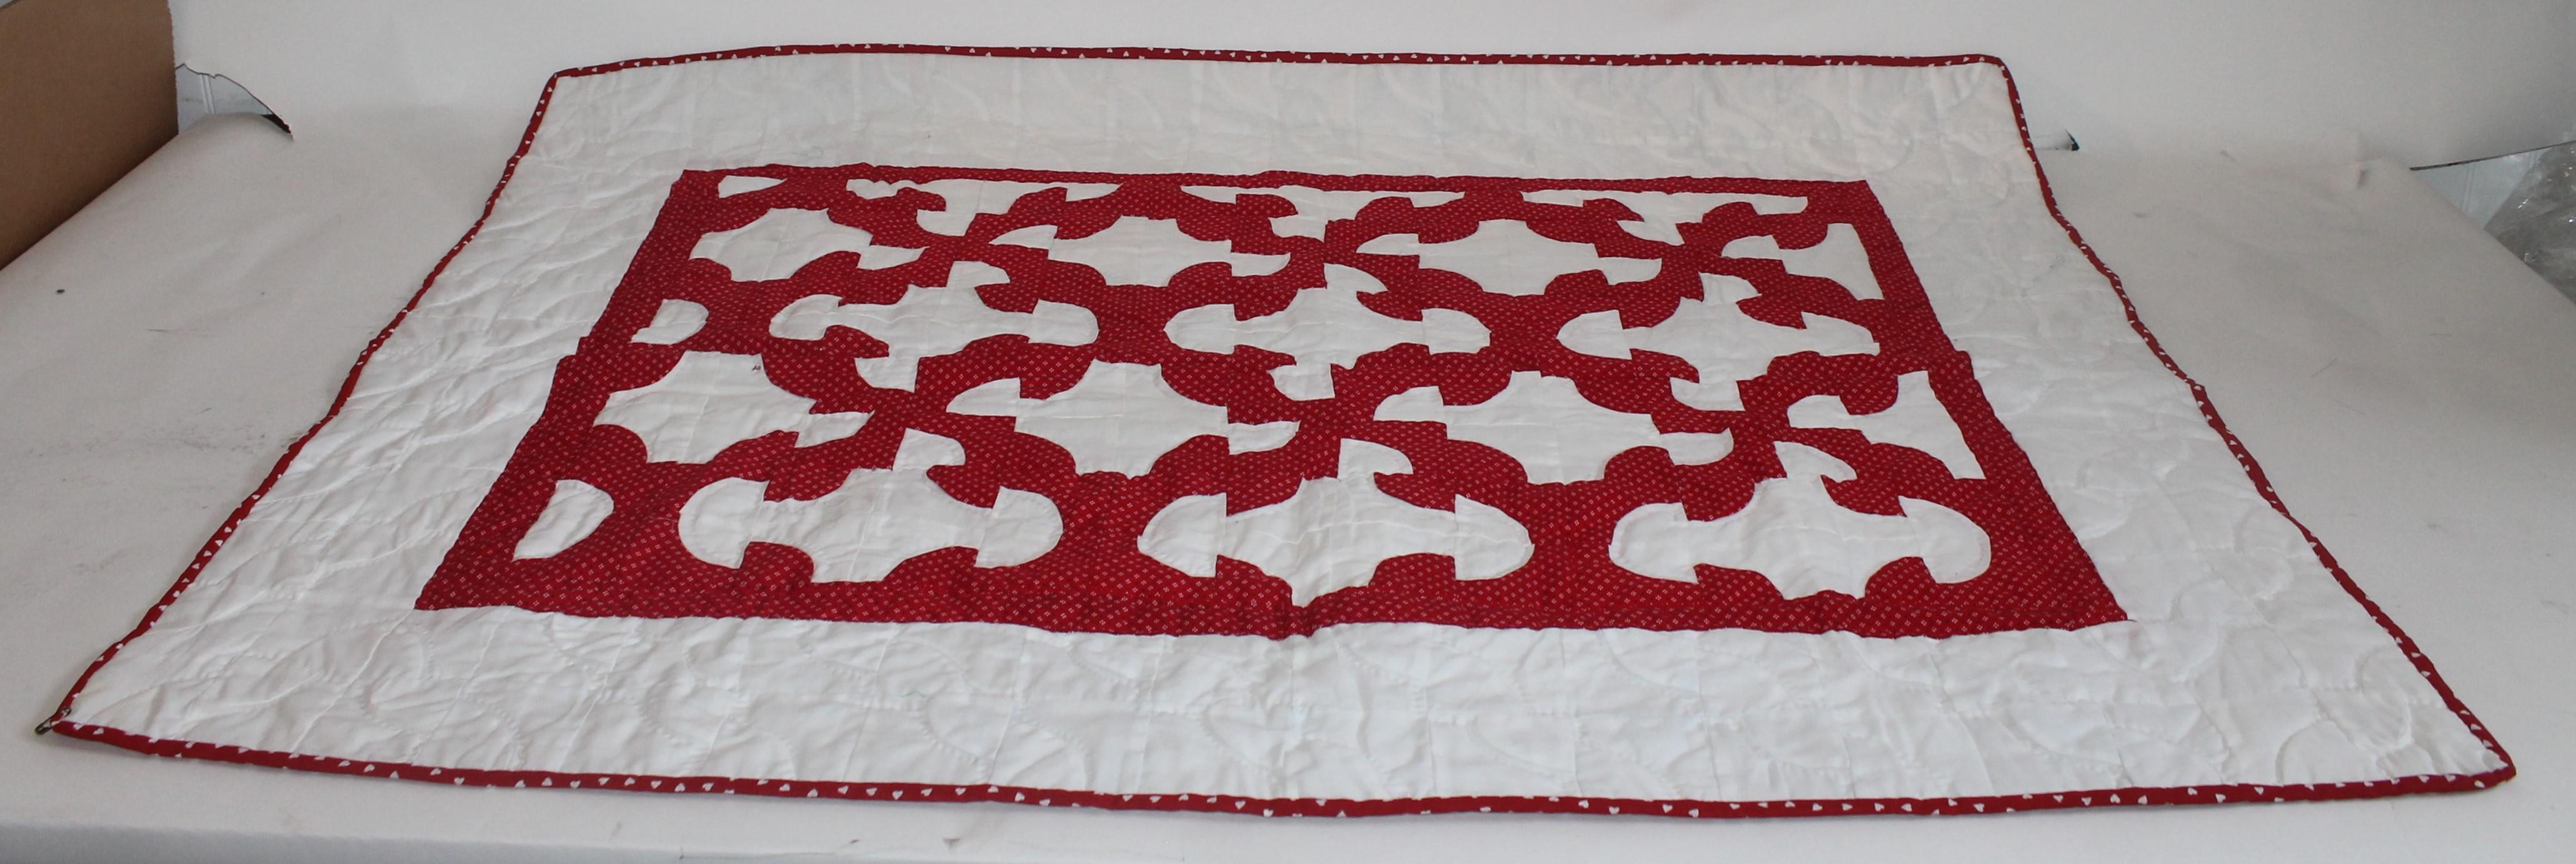 Antique handmade quilt from Lancaster, PA. Measures: 34